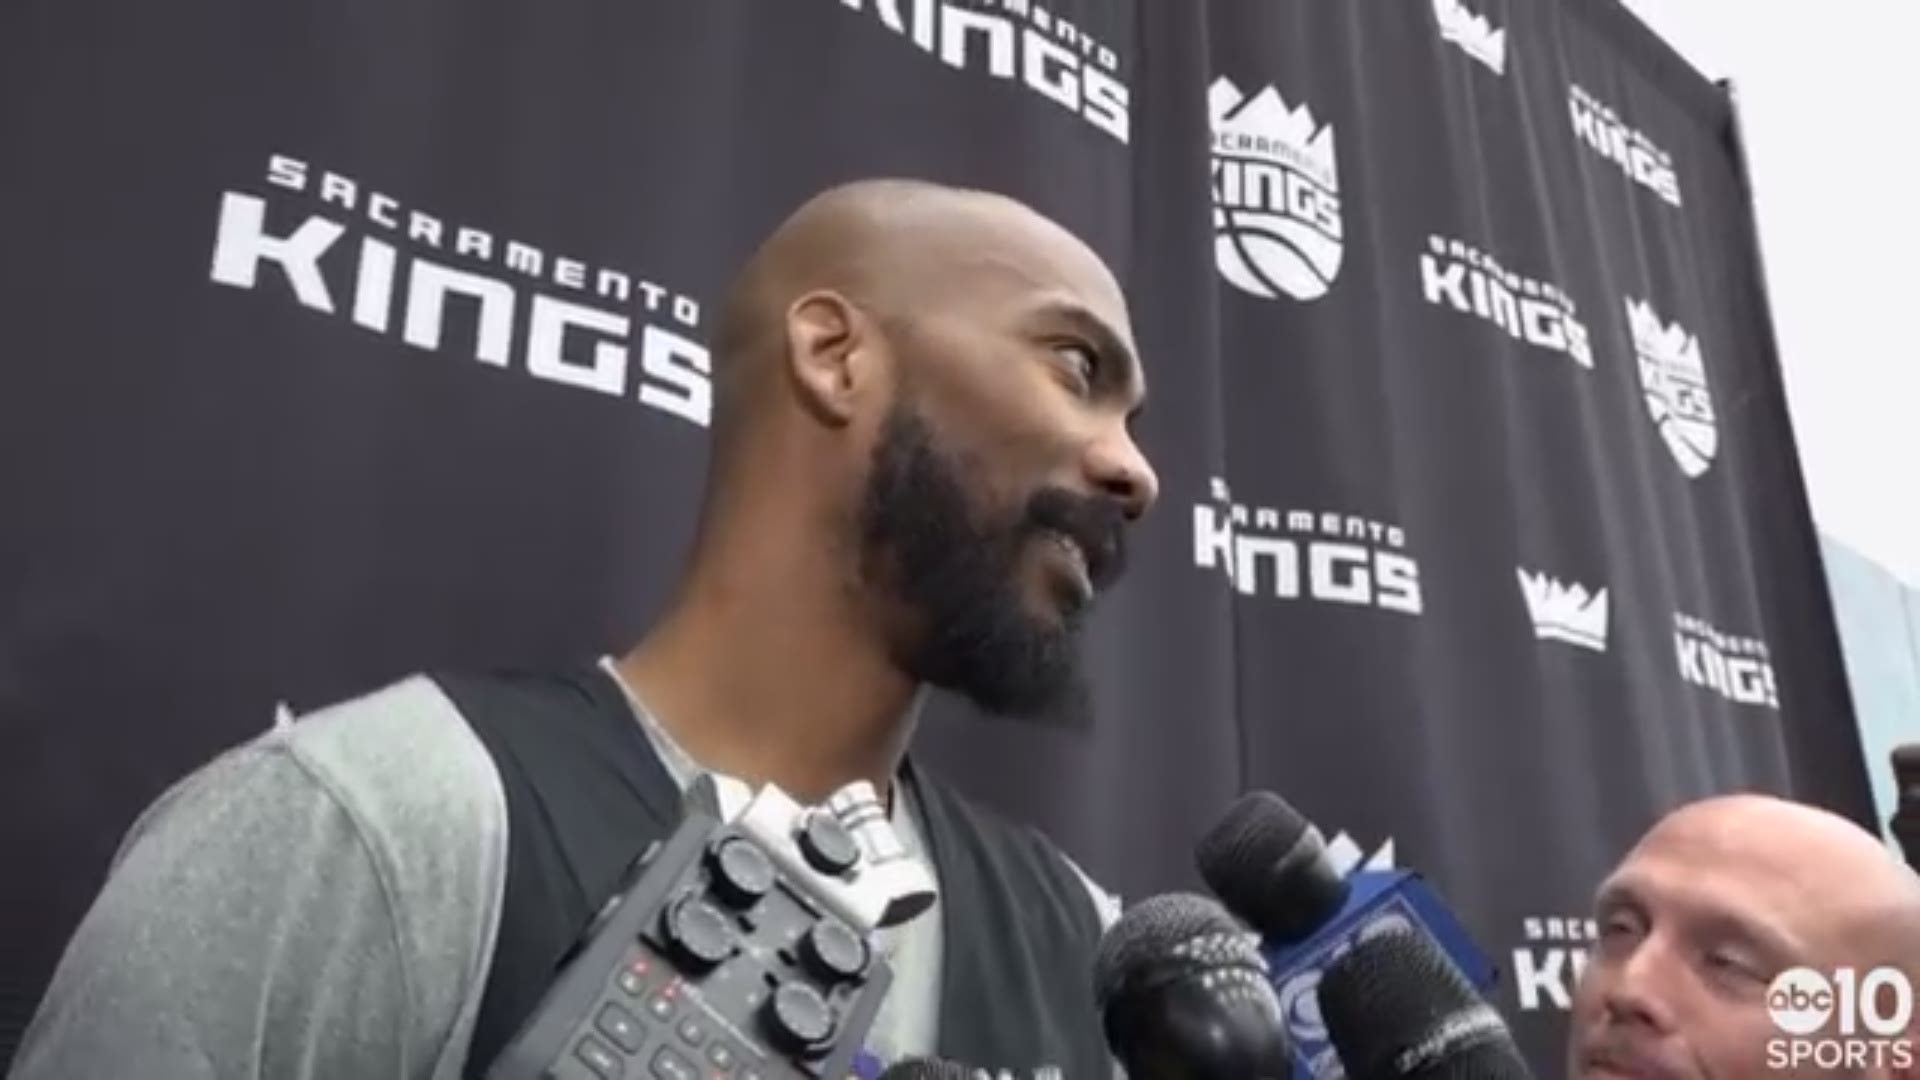 Corey Brewer talks about joining the Sacramento Kings on a 10-day contract on Friday after spending some time with the Philadelphia 76ers. He talks about what he's hoping to provide the team and what new additions Harrison Barnes and Alec Burks will bring.